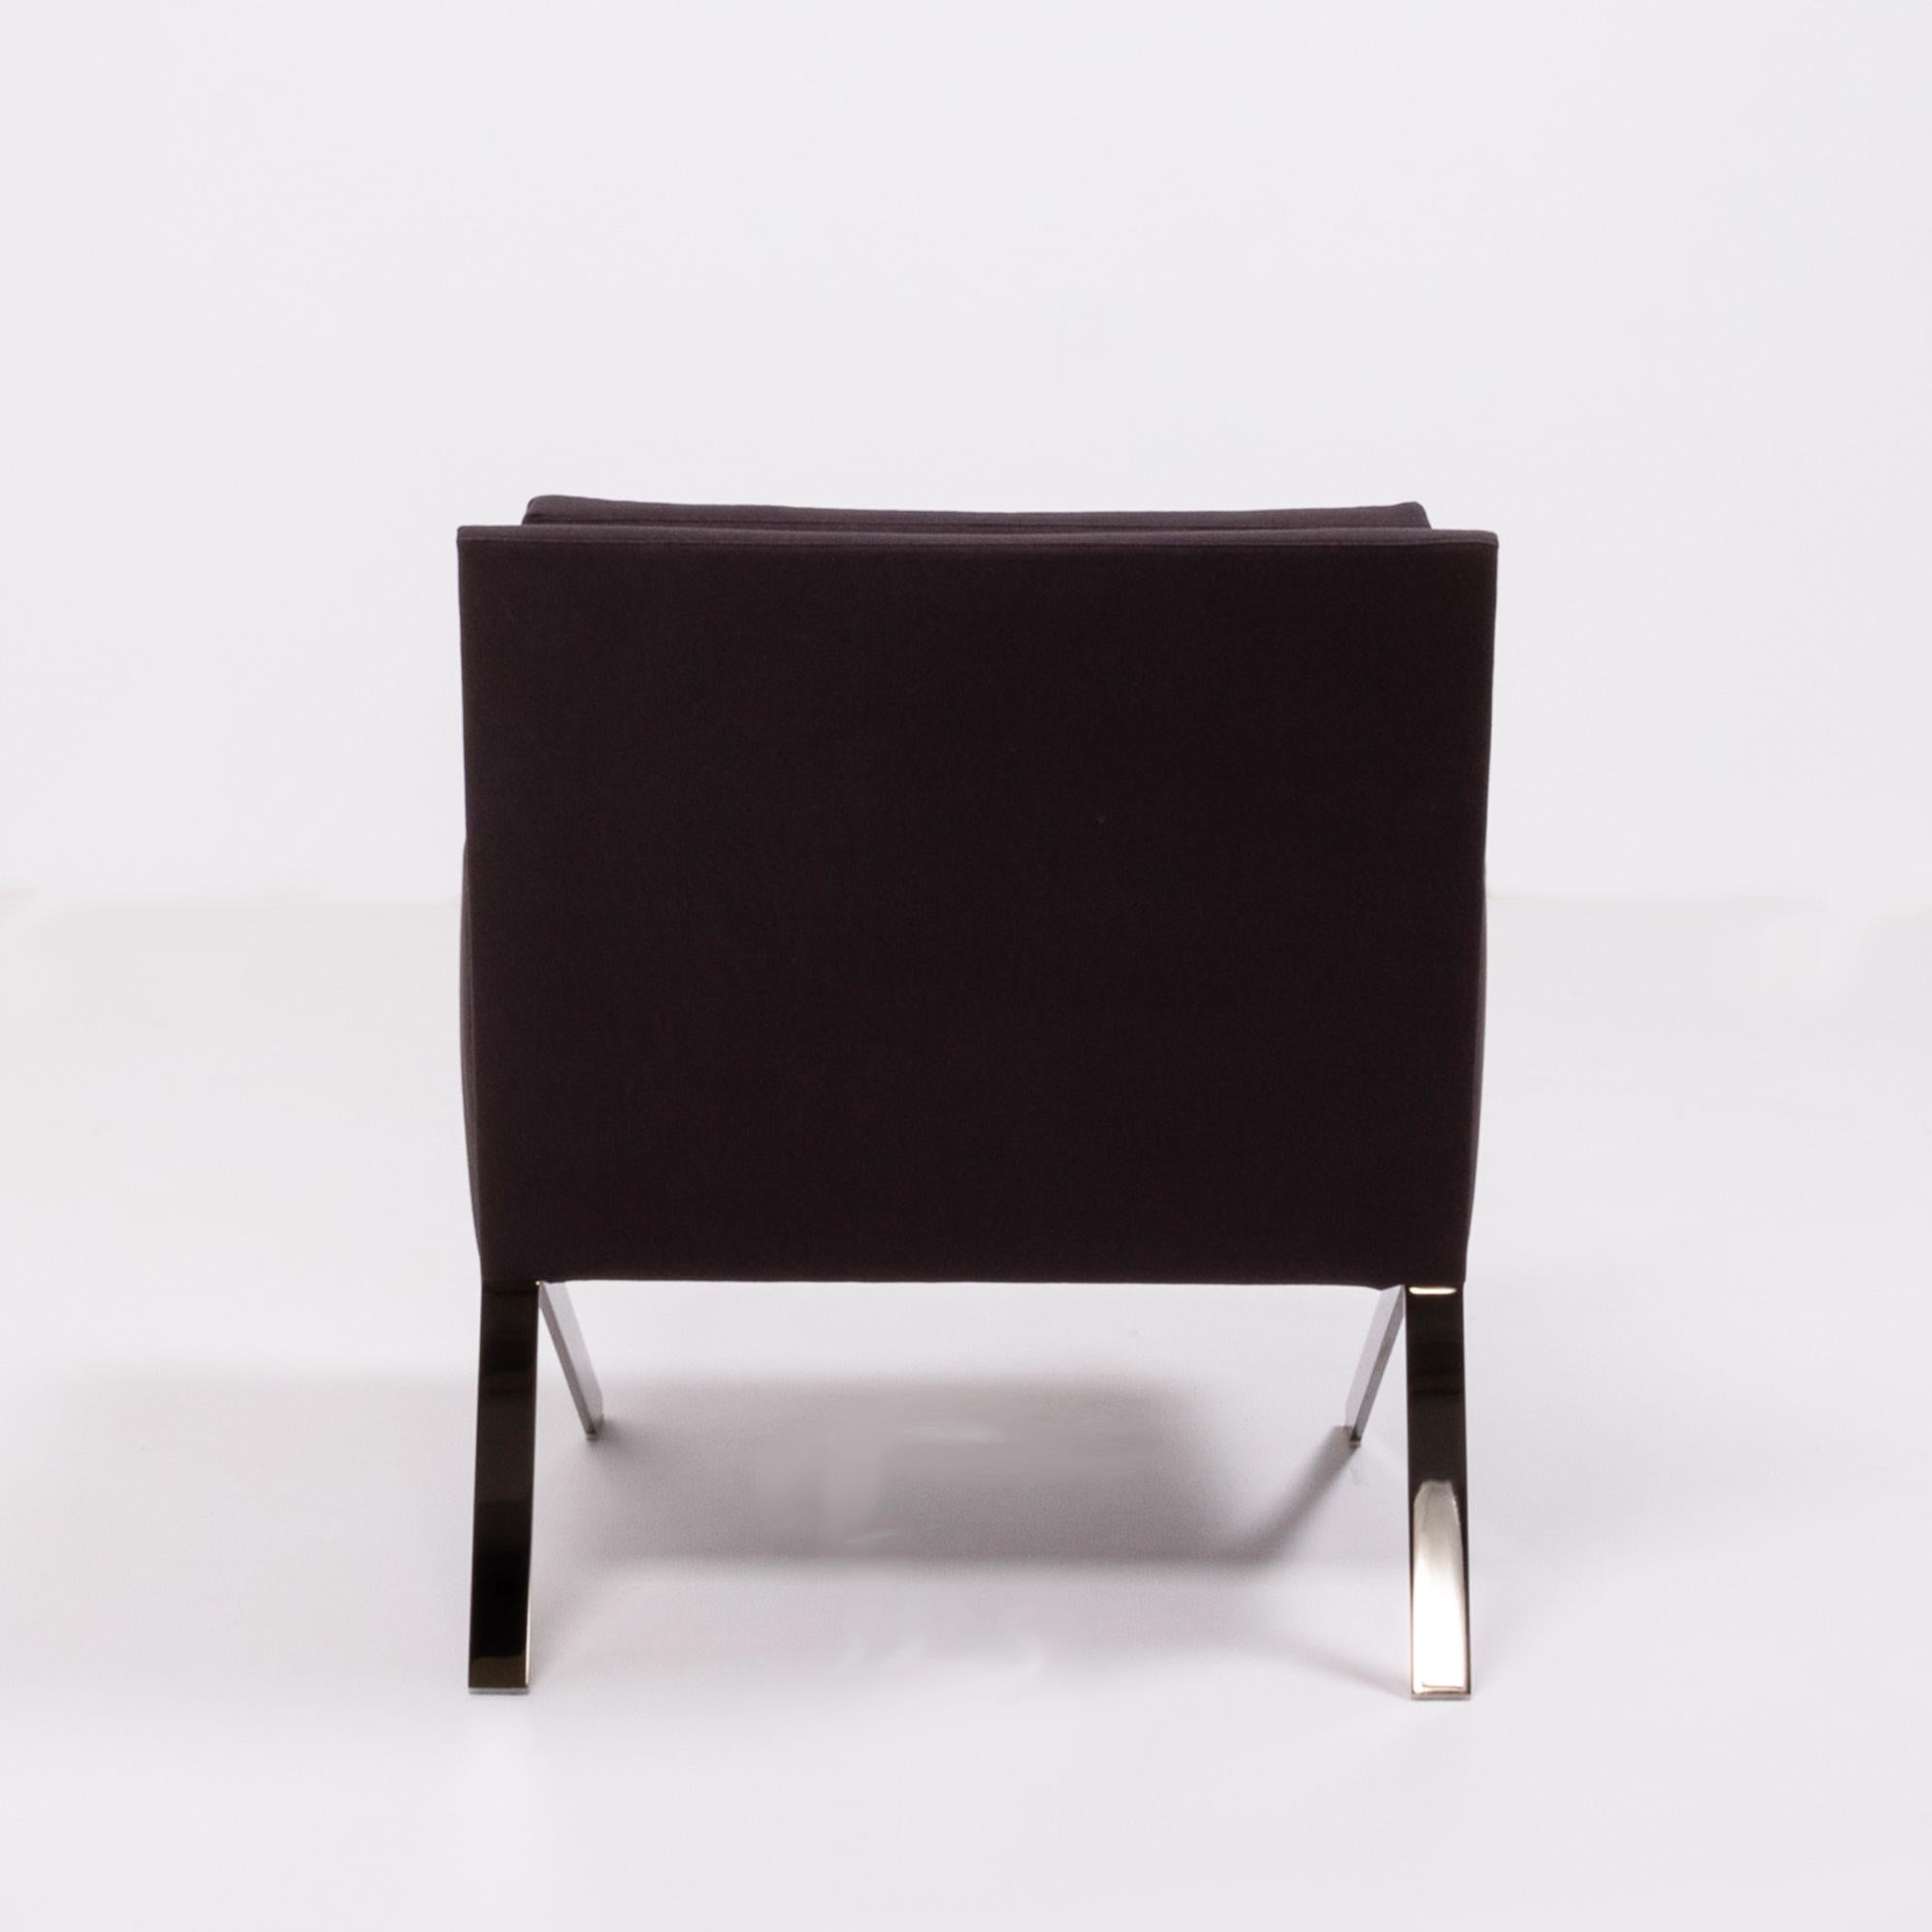 Contemporary B&B Italia Theo Brown Fabric Armchair by Vincent Van Duysen, 2012